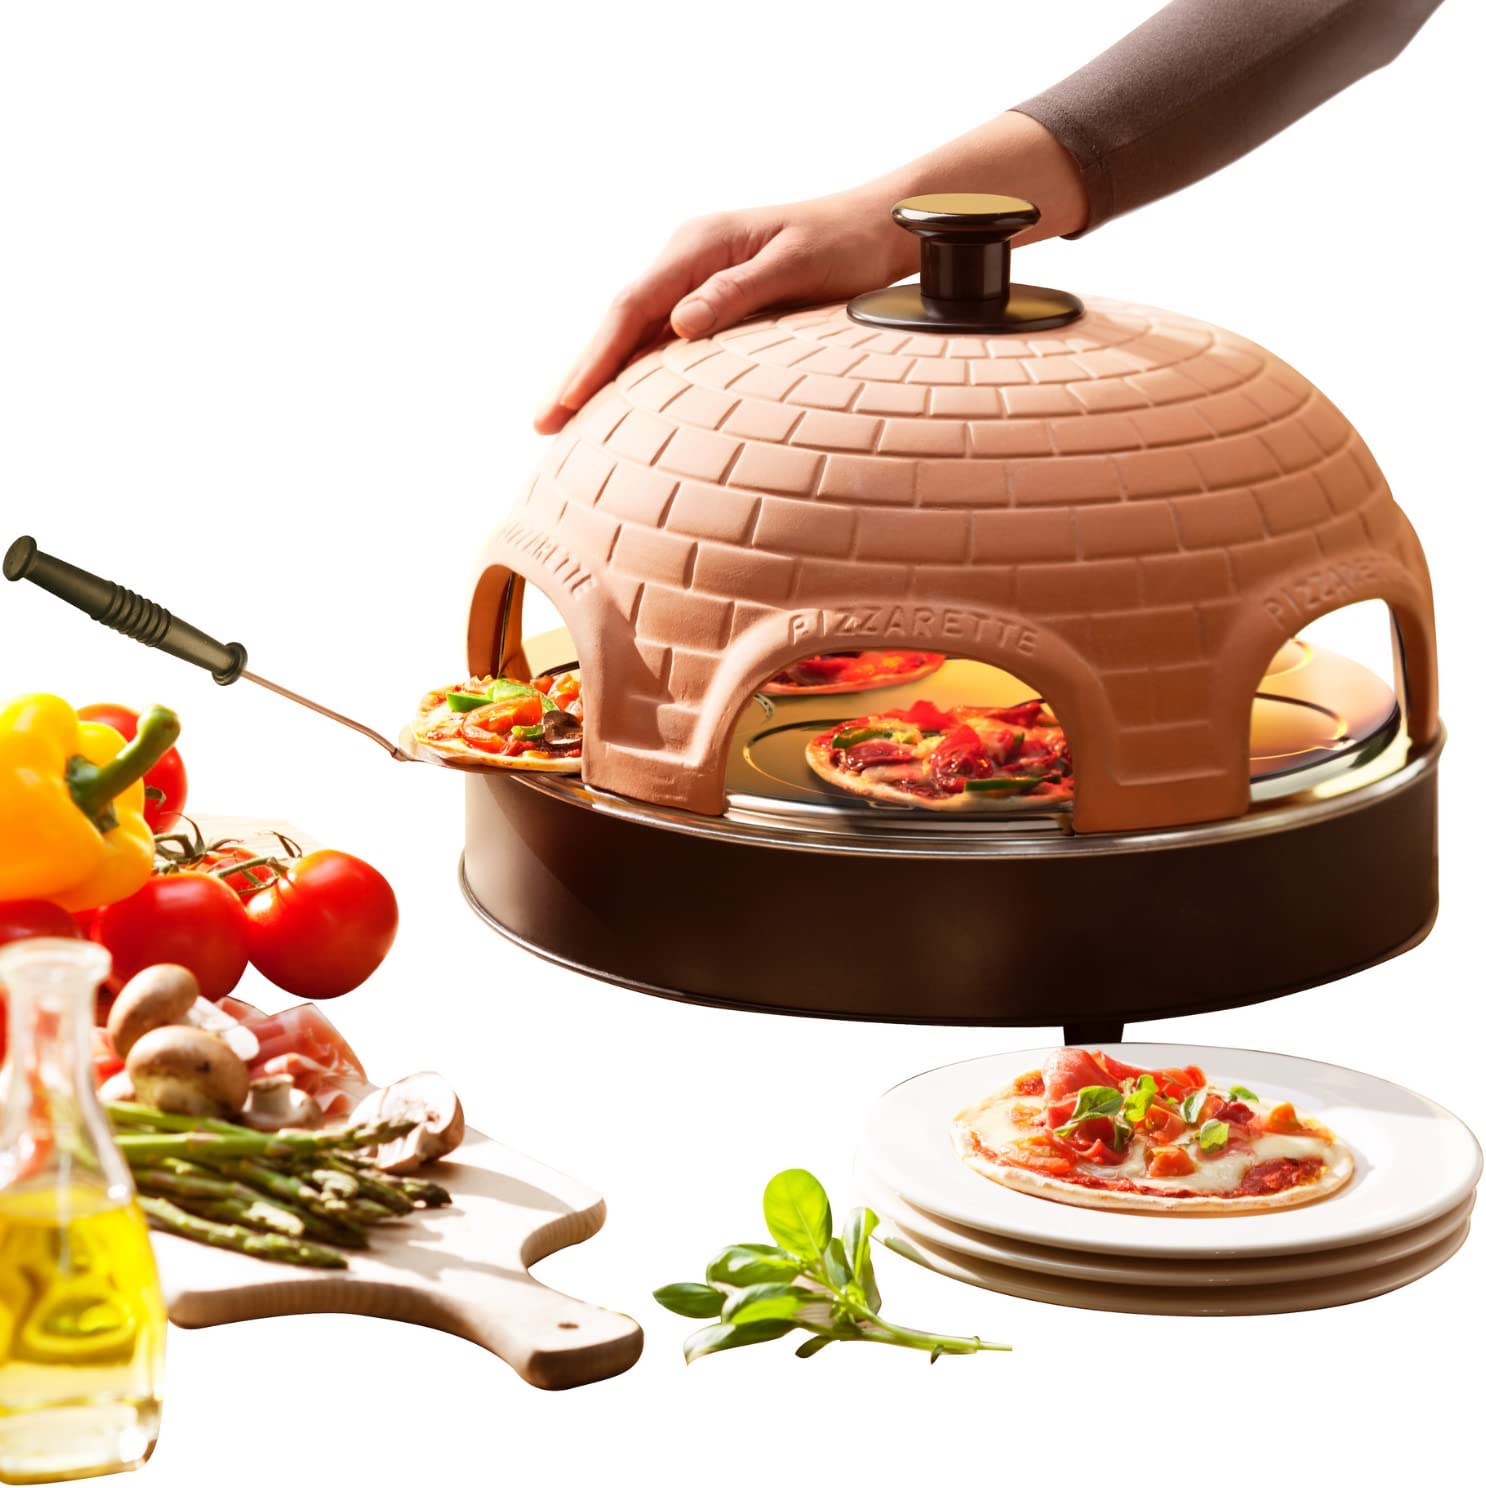 Emerio PO-115984.8 Pizza Oven The Original Handmade Terracotta Clay Hood with Heat Reflector Shield Patented Design for Mini Pizza Family Fun for 6 People Funcooking Star No. 1